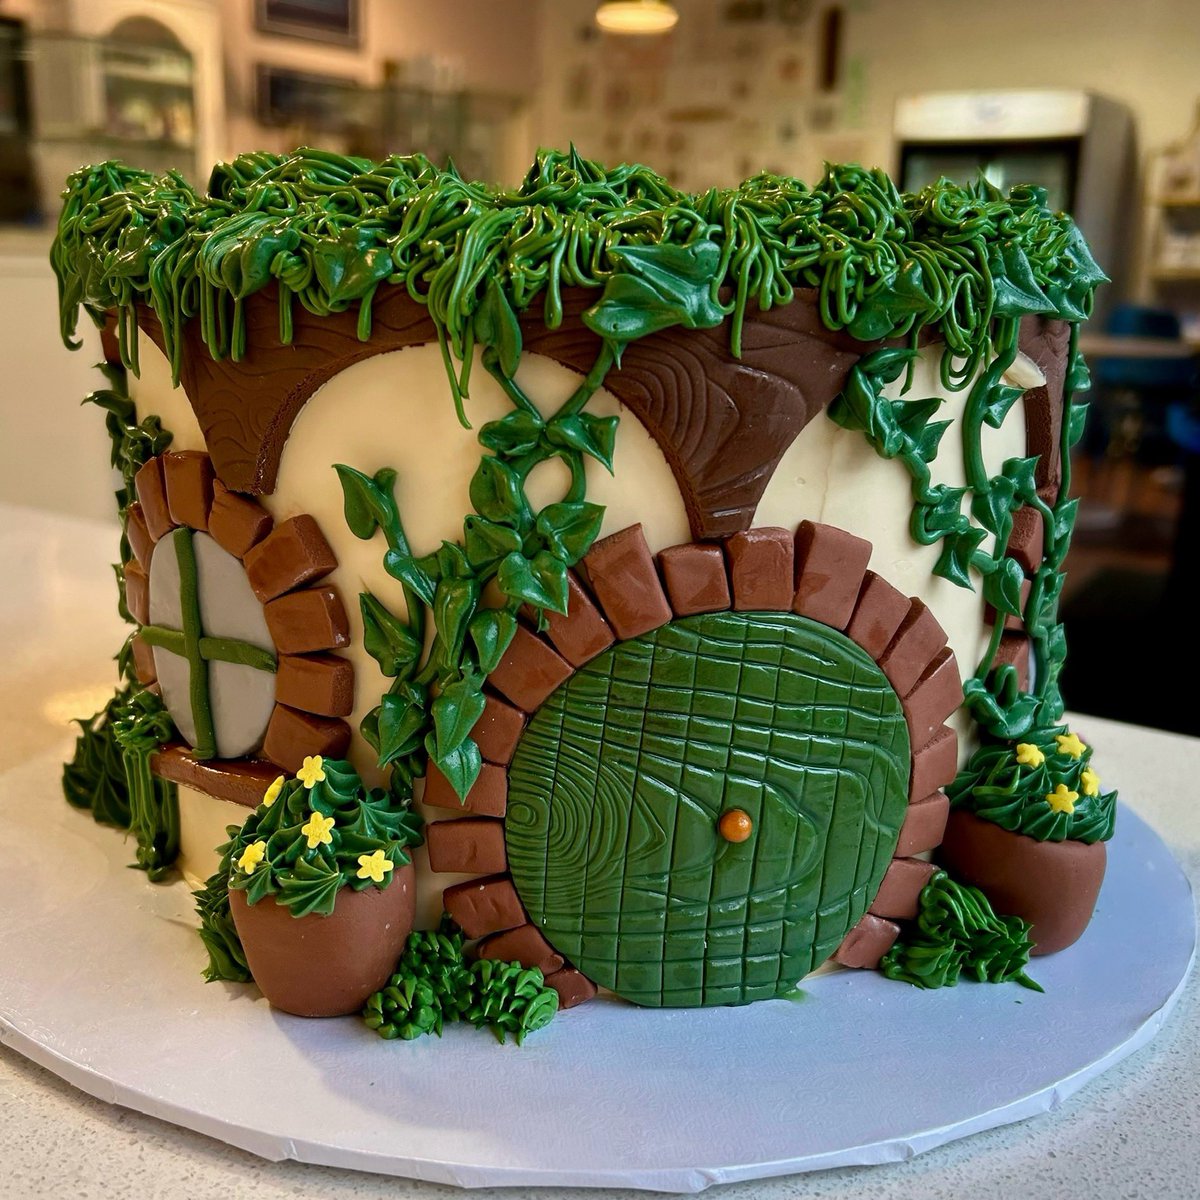 did you guys know about hobbit cake